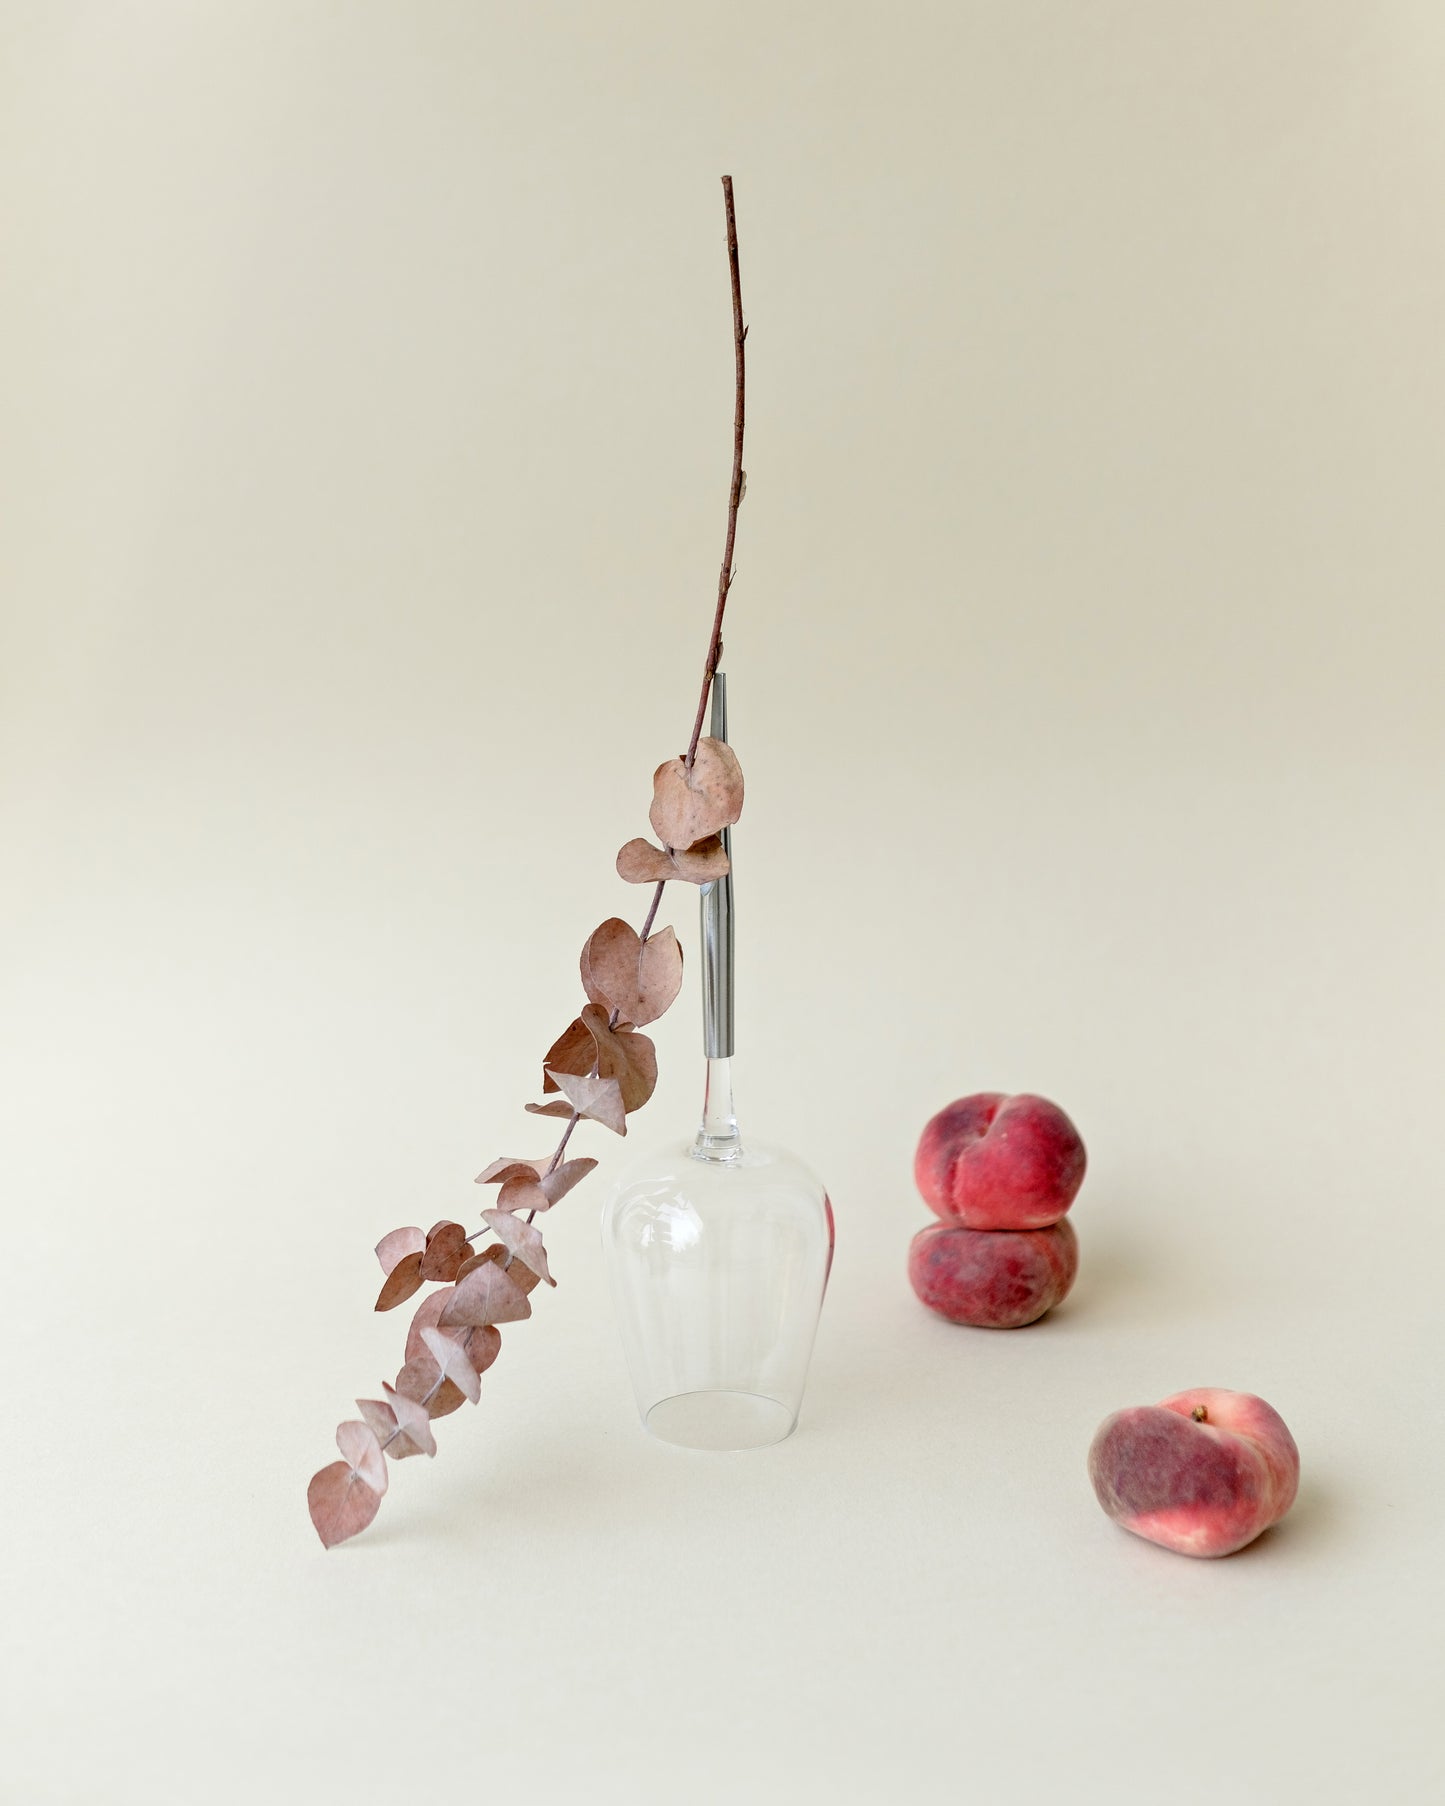 one wine glass for picnic with metal pin, placed upside down next to peaches and a plant branch